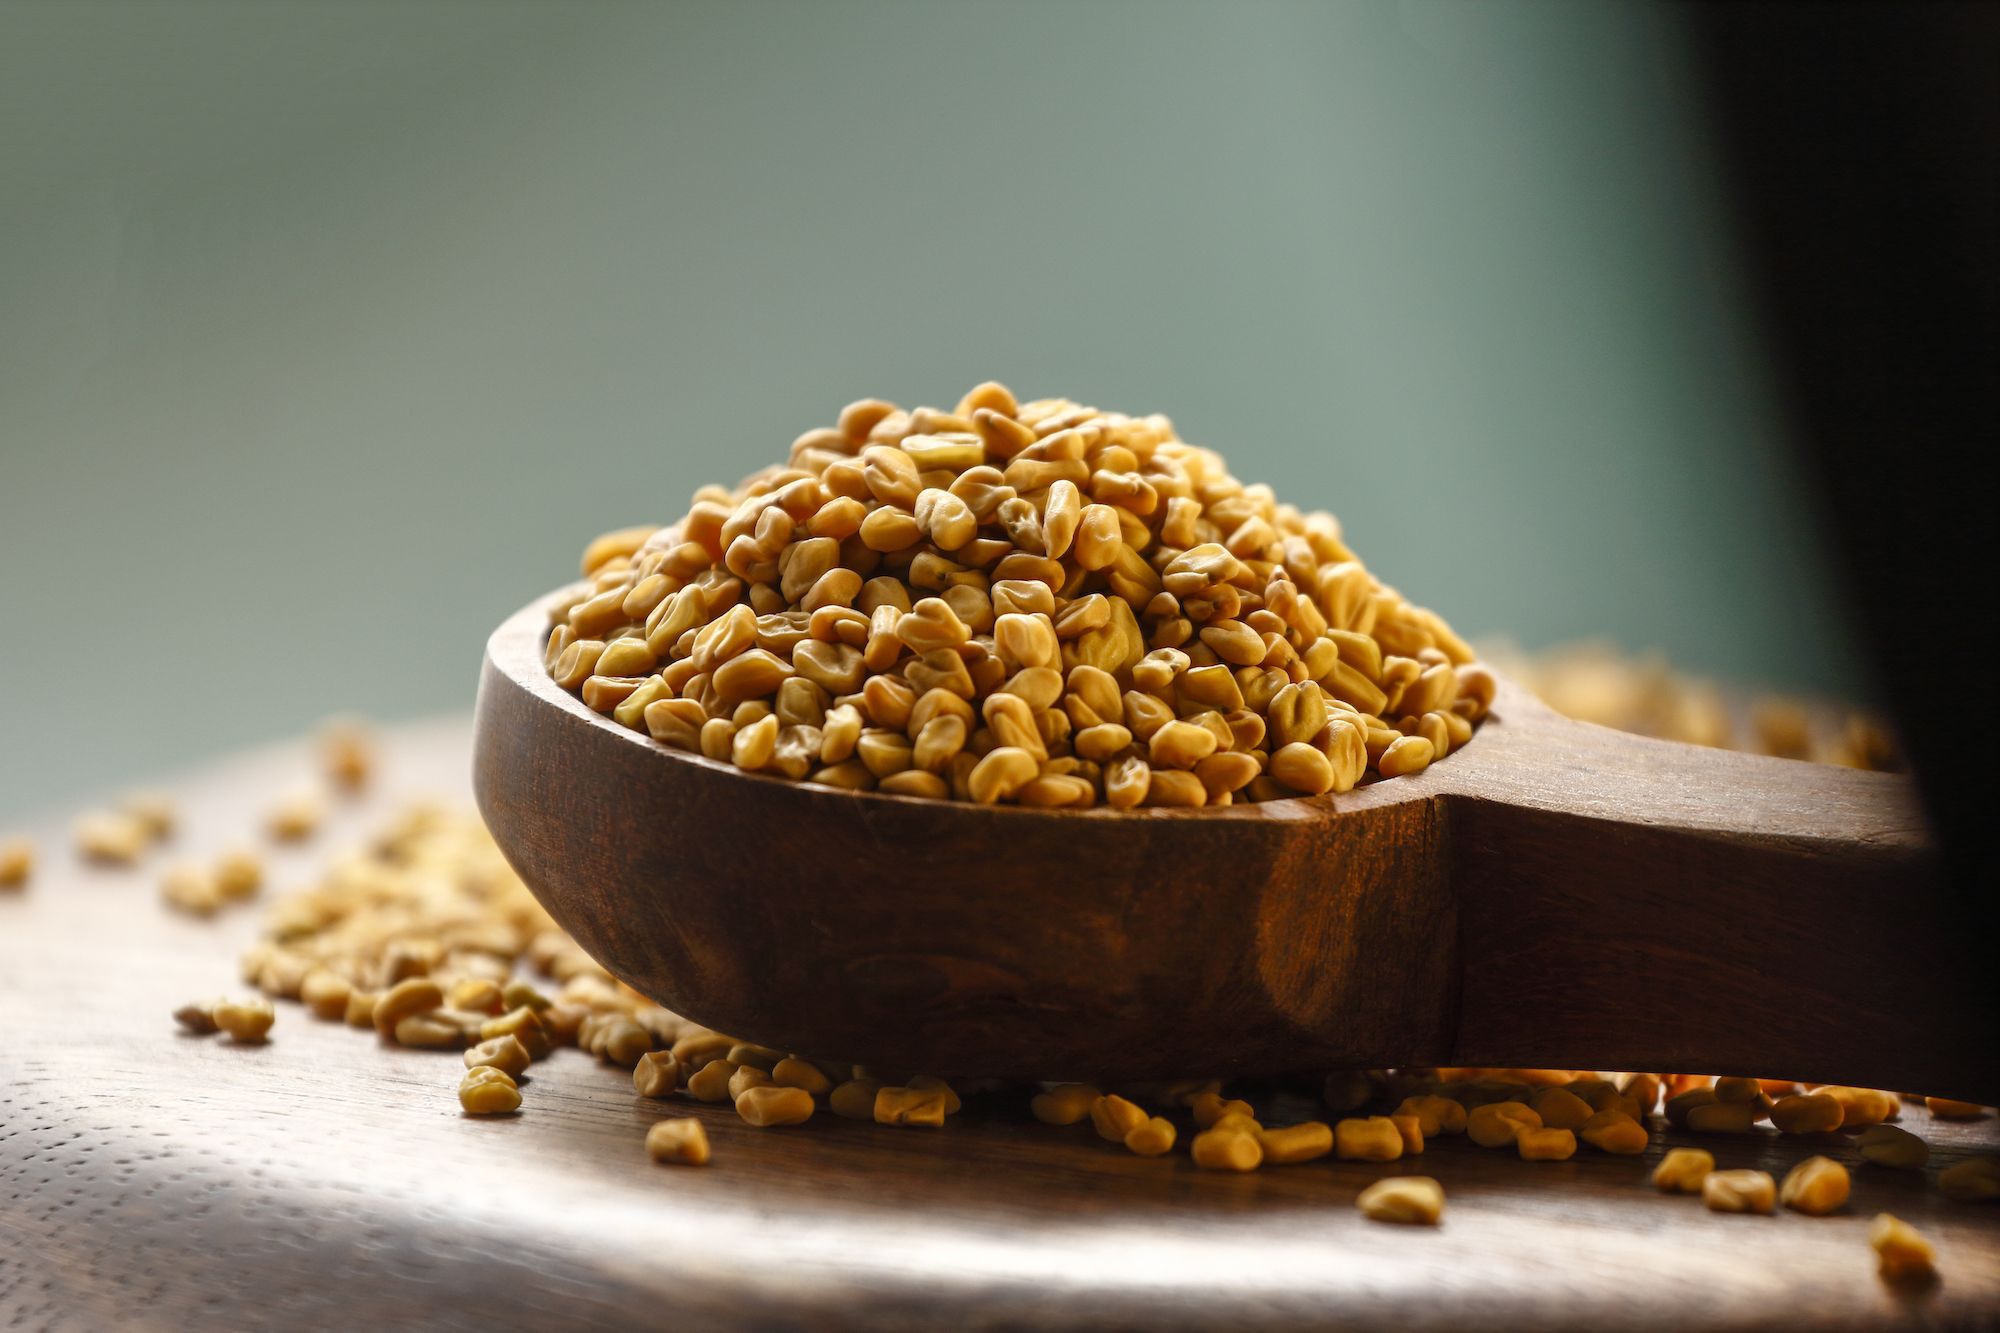 3 Reasons to Use Fenugreek Seeds for Hair - The World of Herbs & Spices